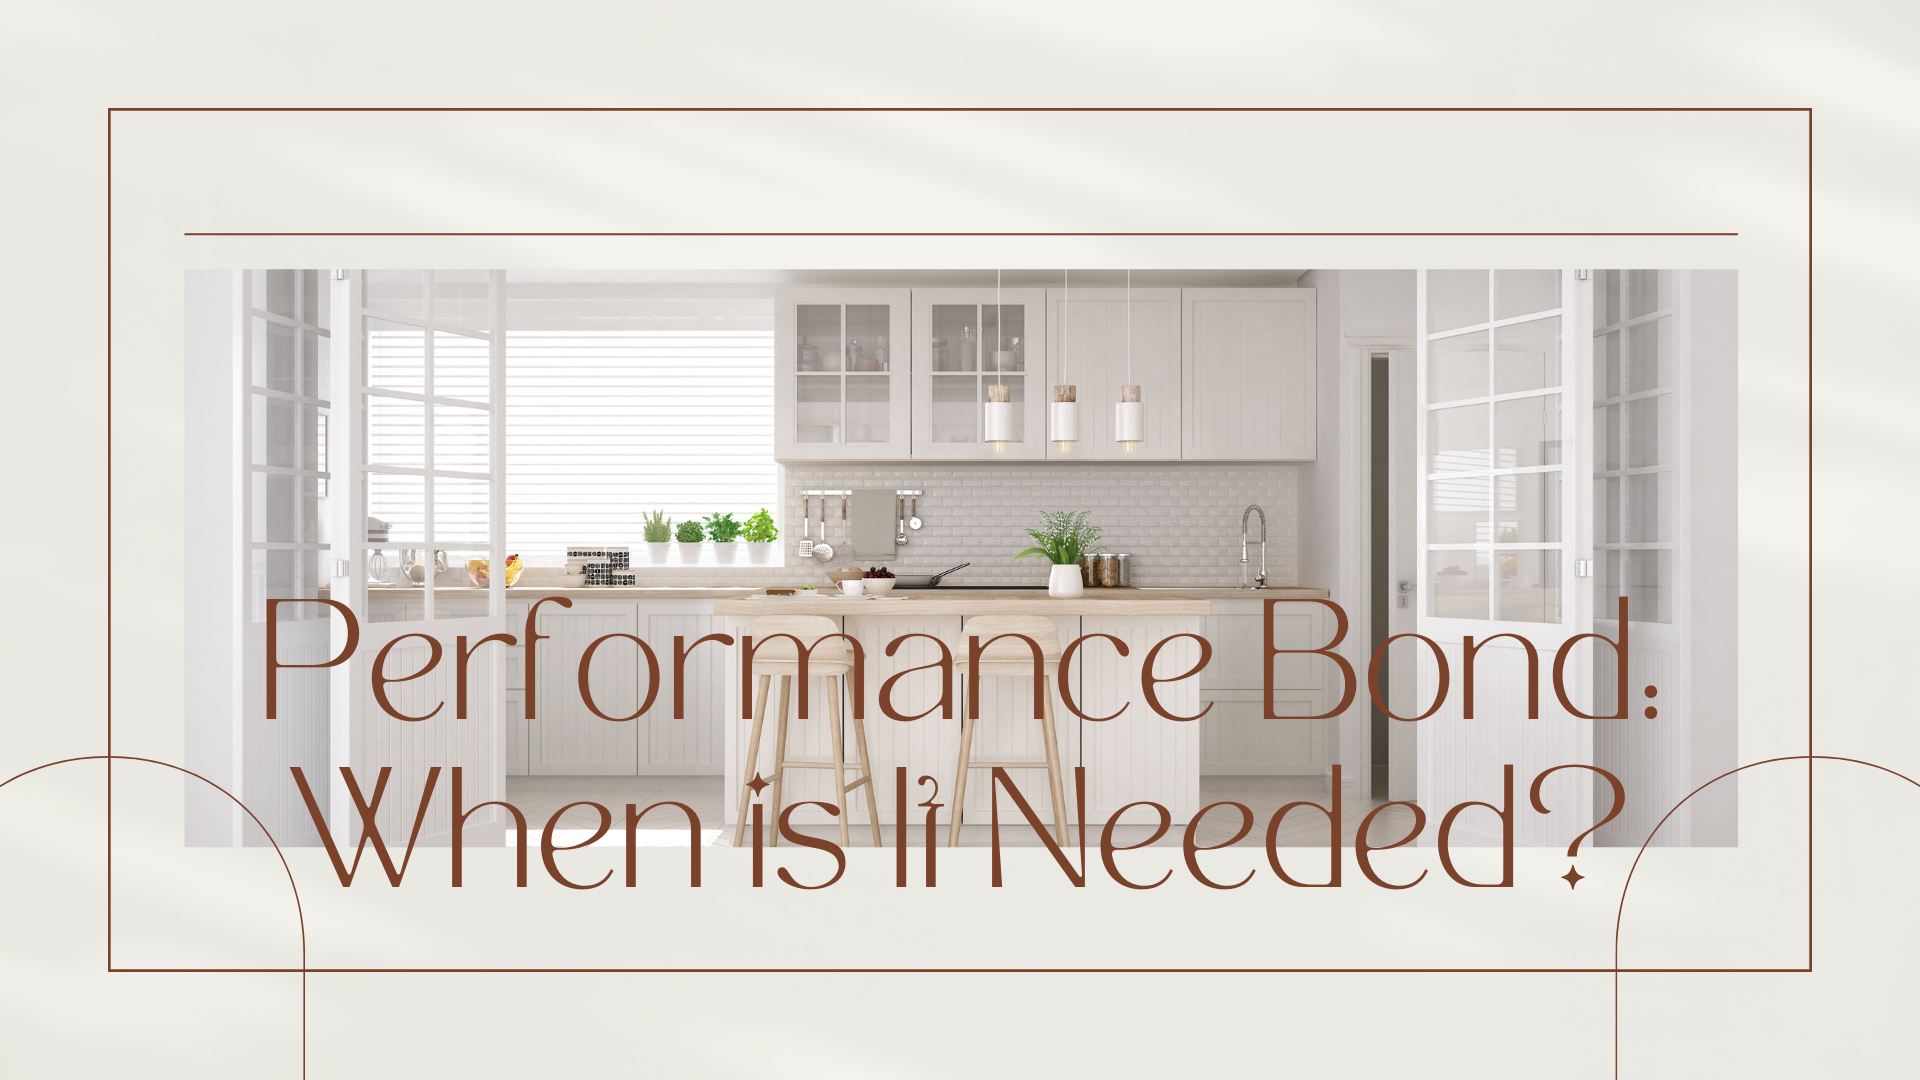 performance bond - What is the definition of a performance bond - minimalist kitchen